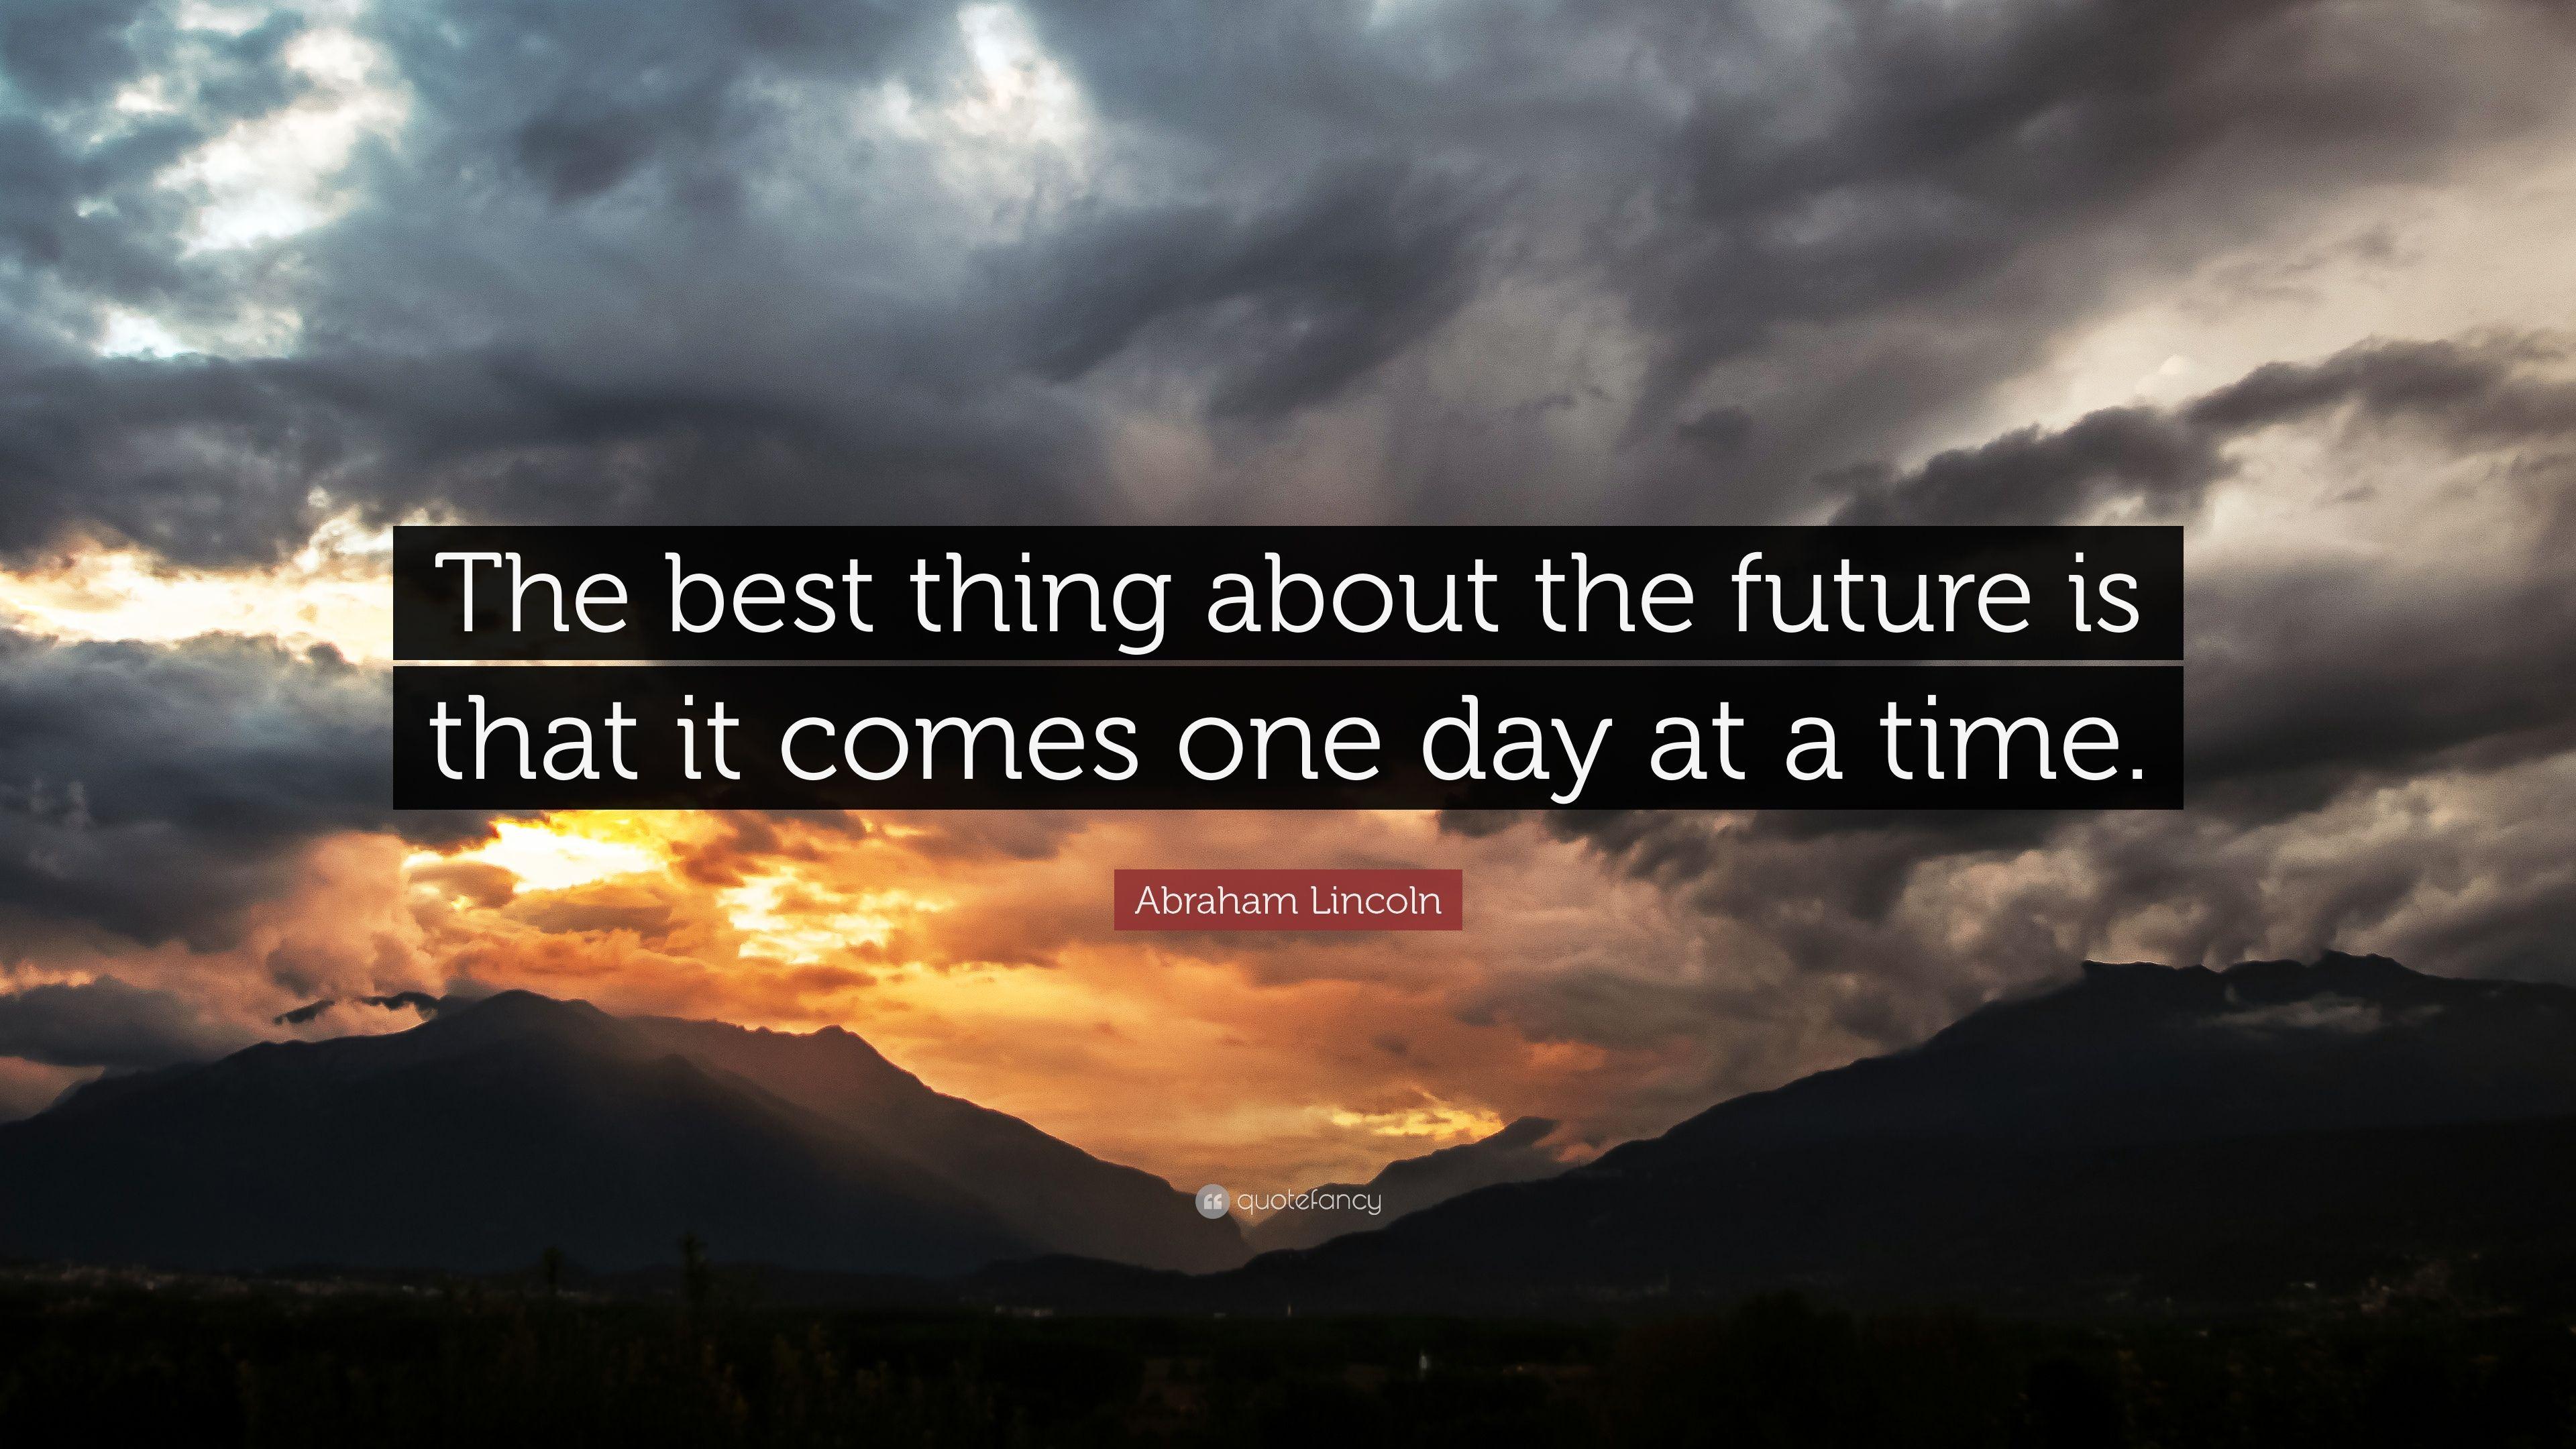 Abraham Lincoln Quote: “The best thing about the future is that it